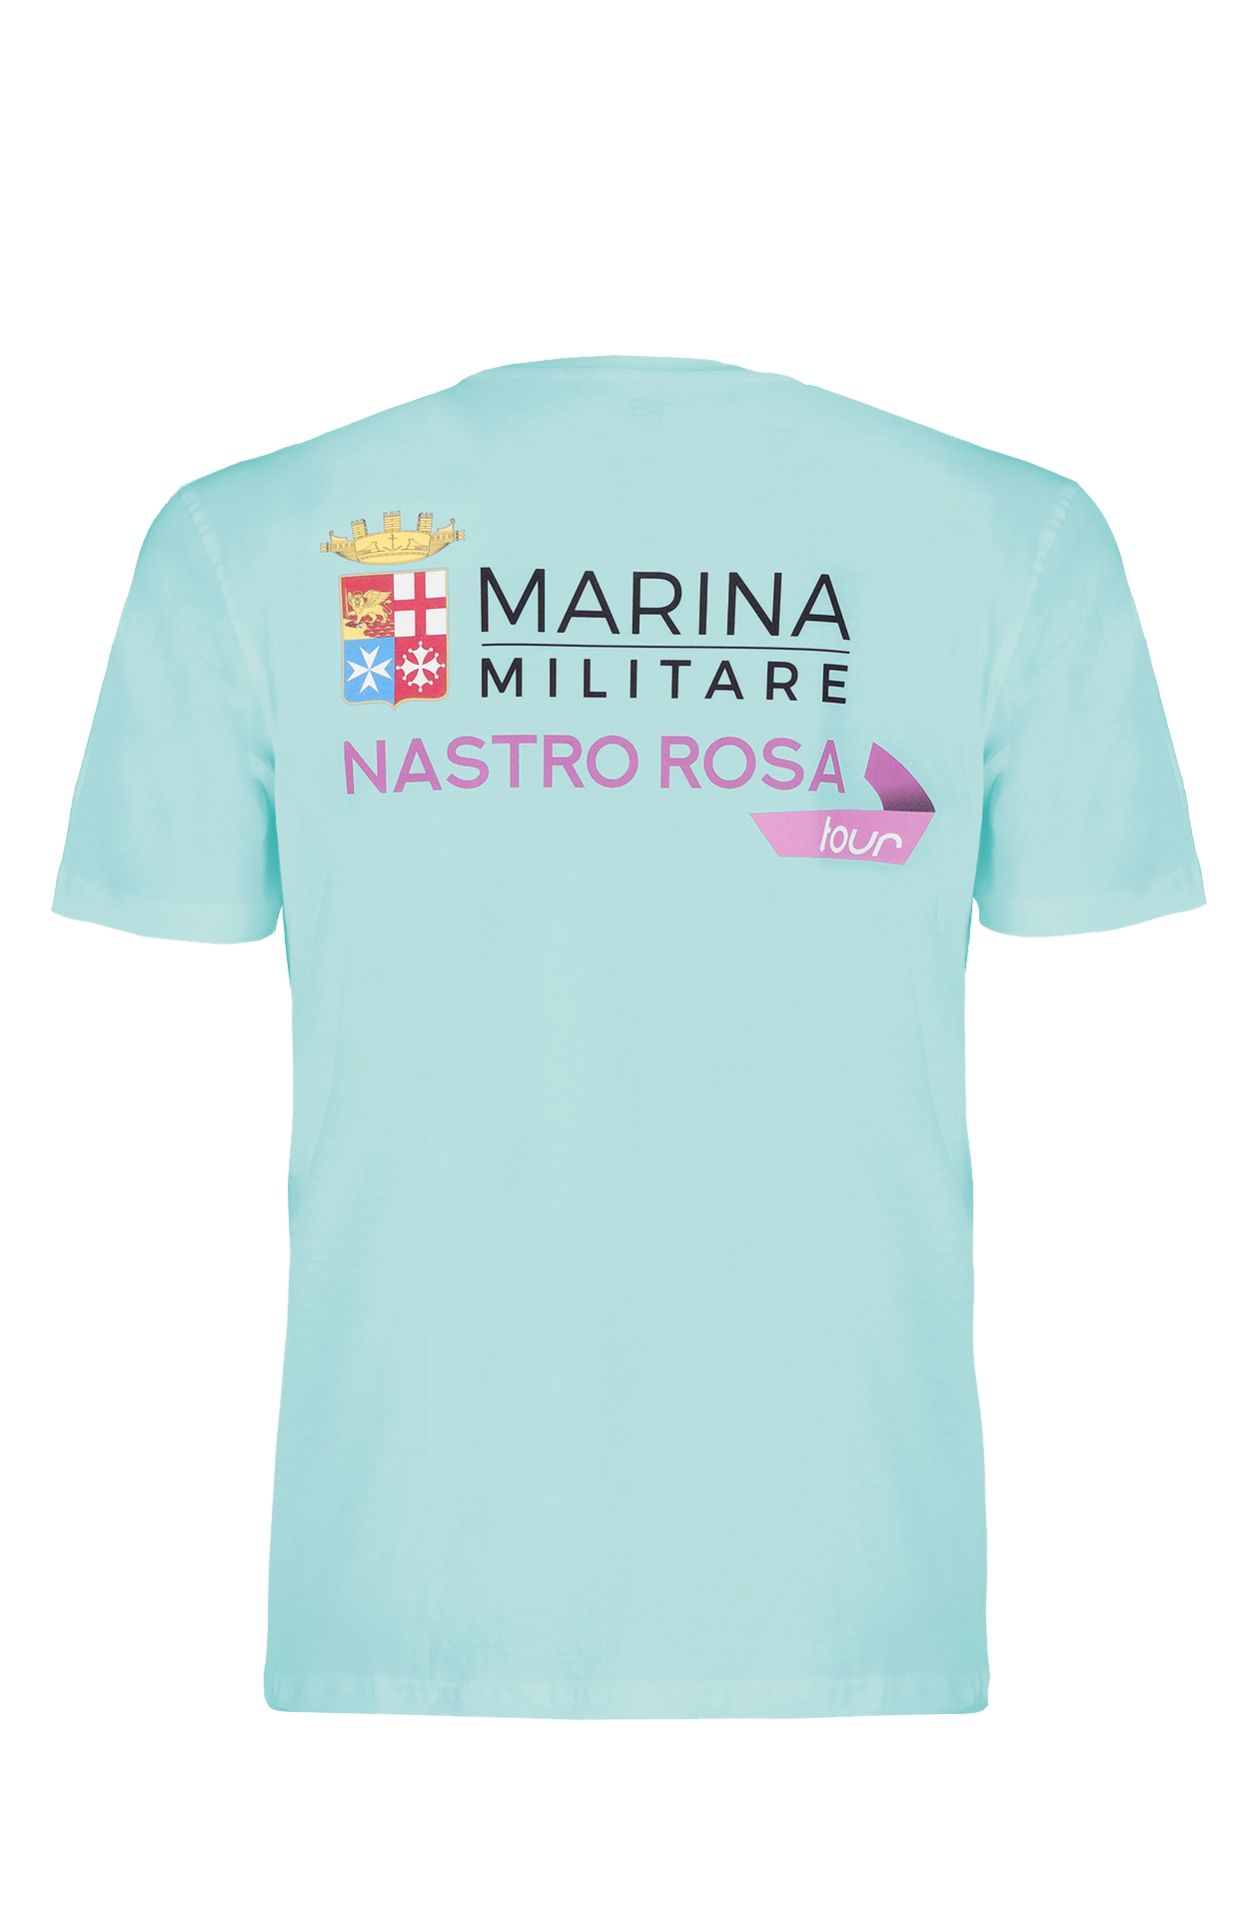 T-SHIRT LIMITED EDITION NASTRO ROSA TOUR